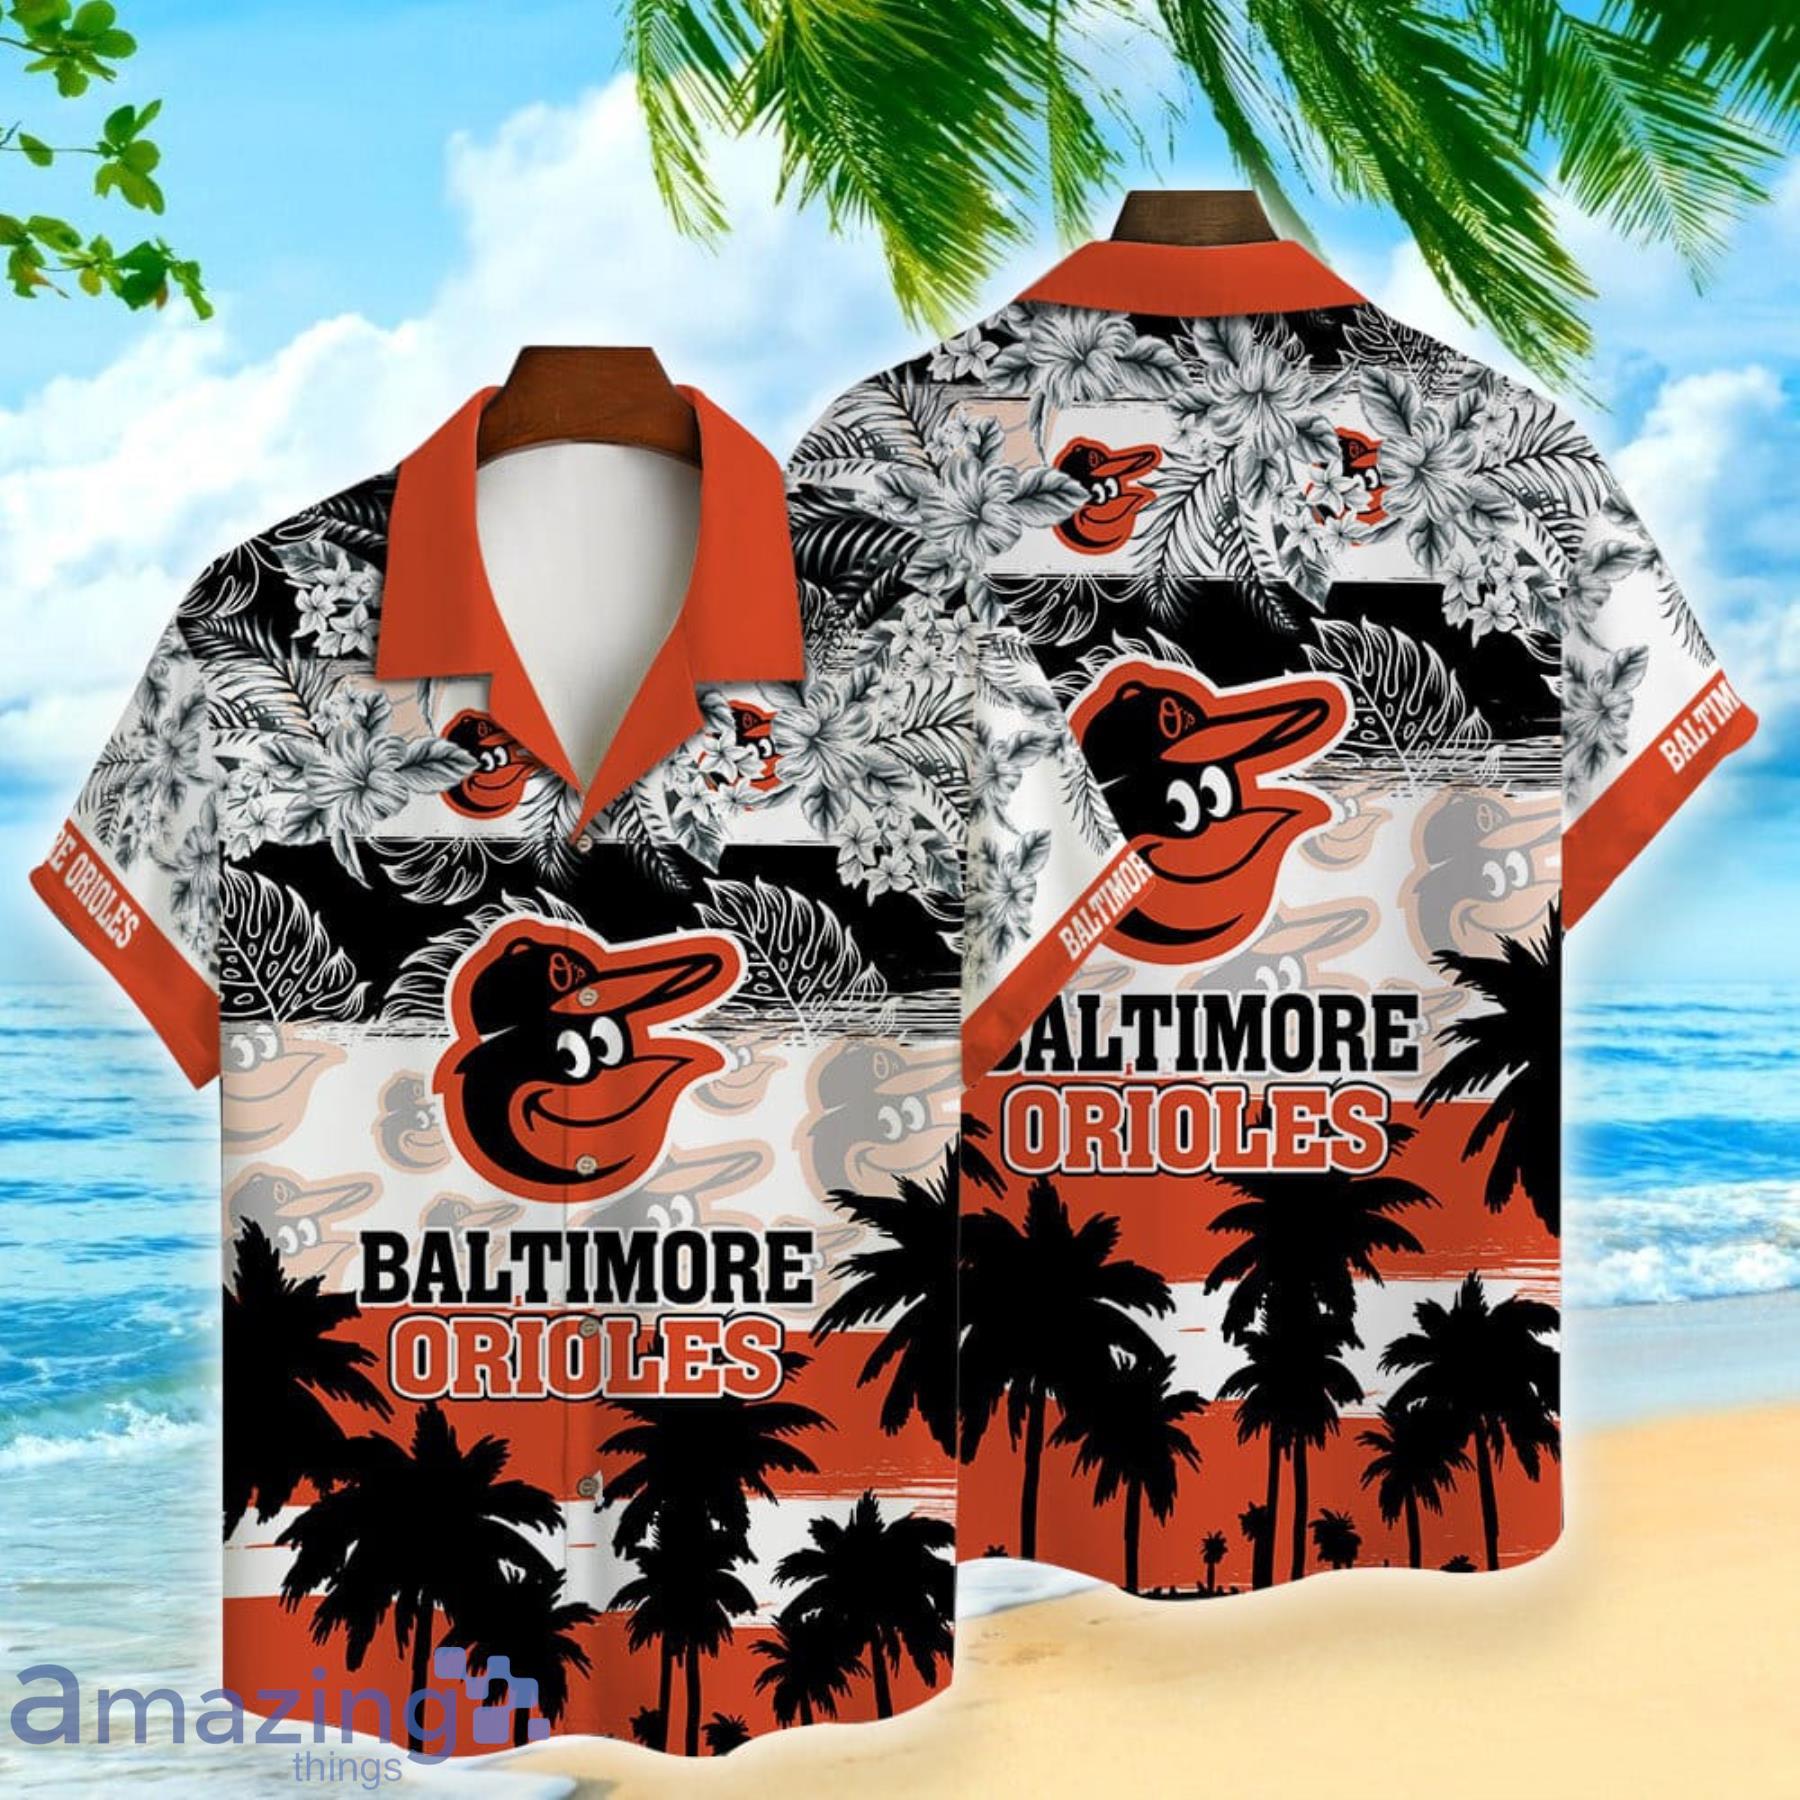 Baltimore Orioles Major League Baseball Coconut Pattern And Flower